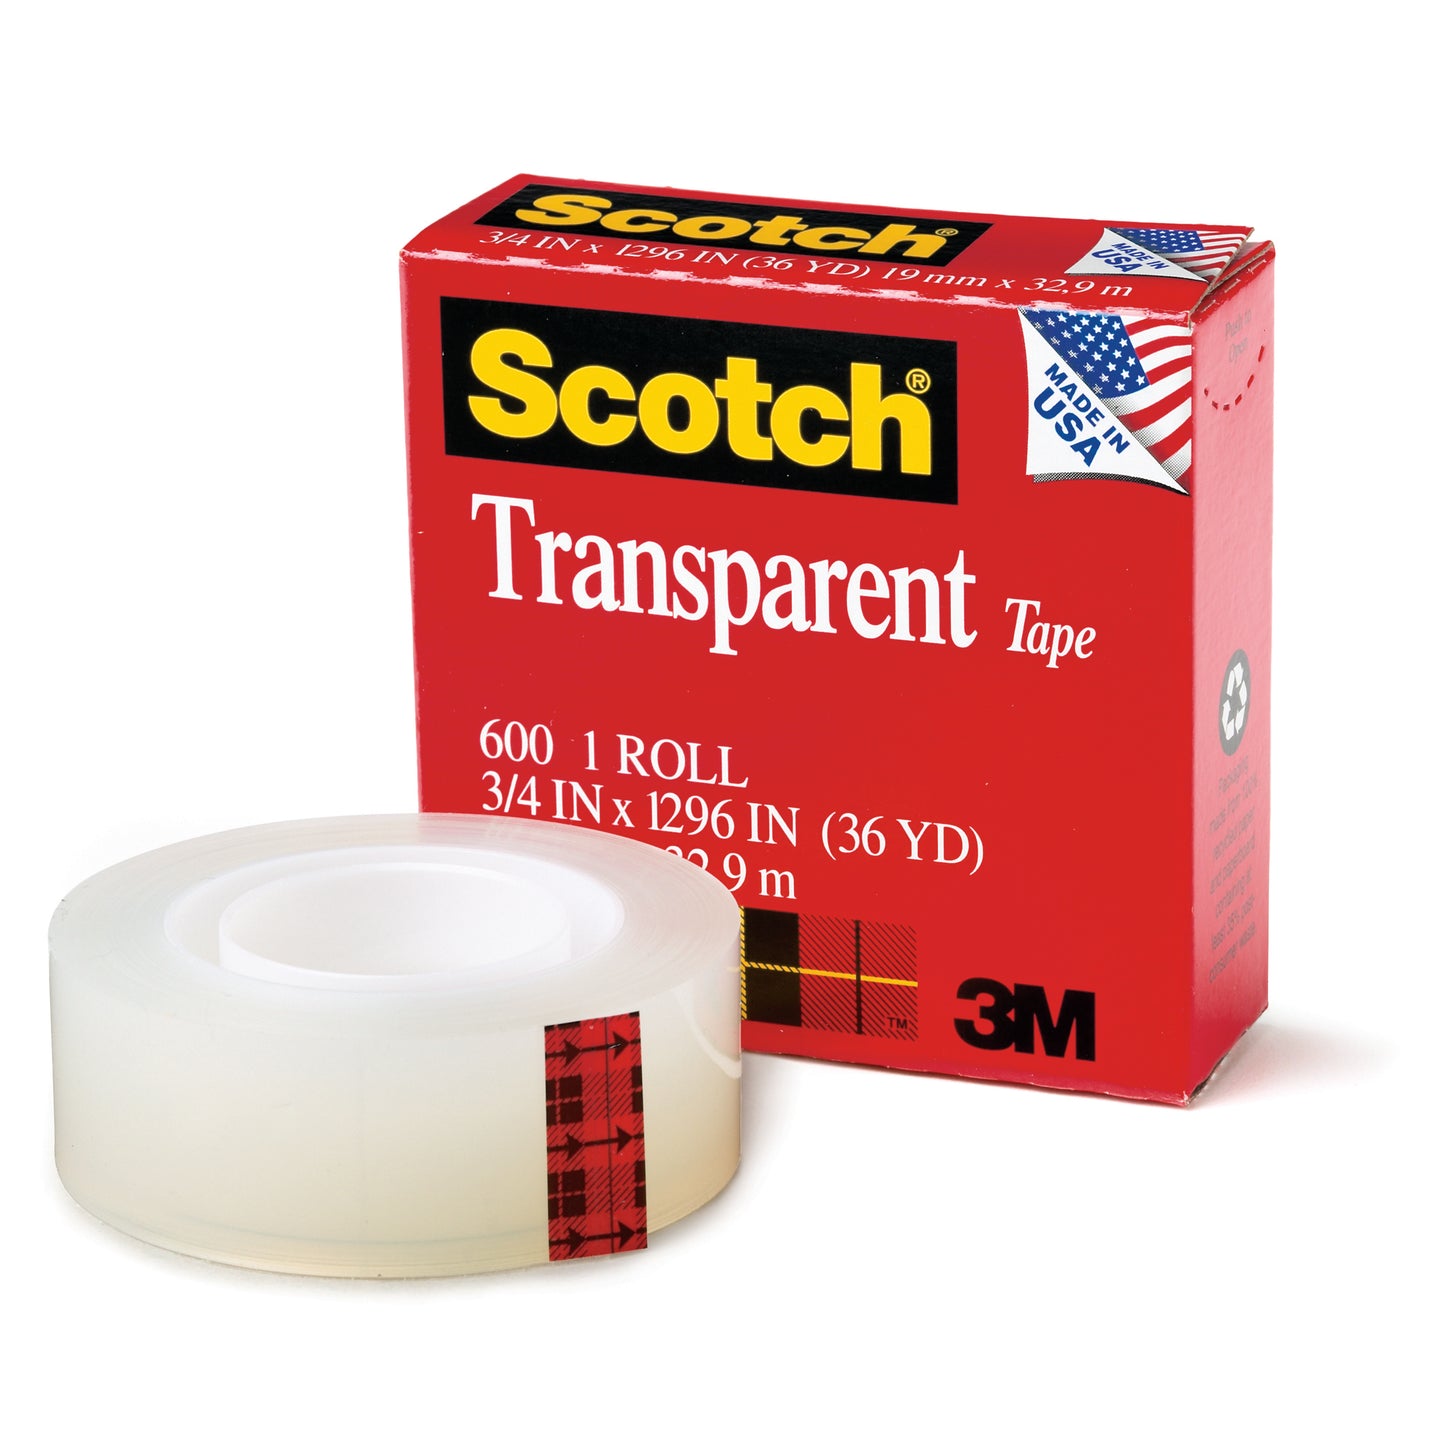 Transparent Tape Refill Roll, 3/4" x 1296", Pack of 6